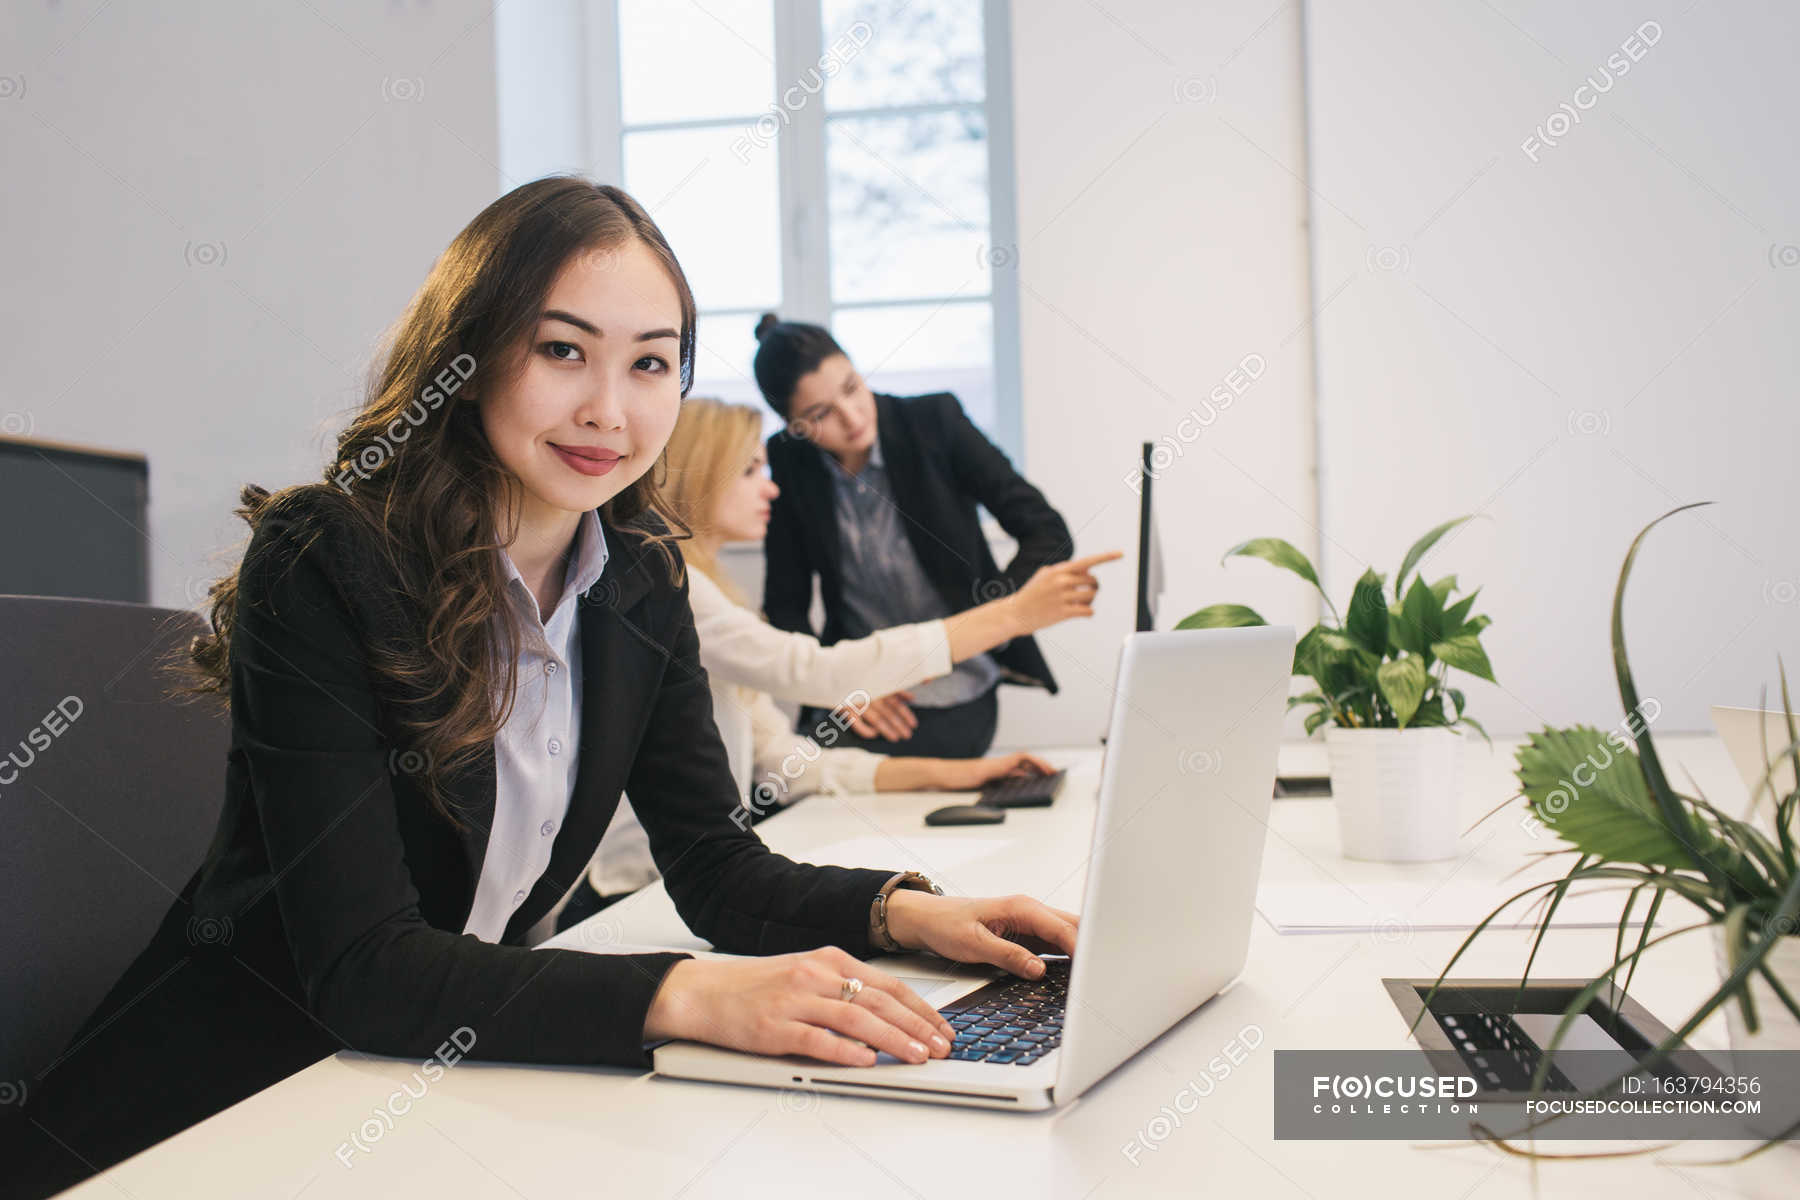 Young office worker sitting at desktop in office and smiling at camera. —  occupation, horizontal - Stock Photo | #163794356